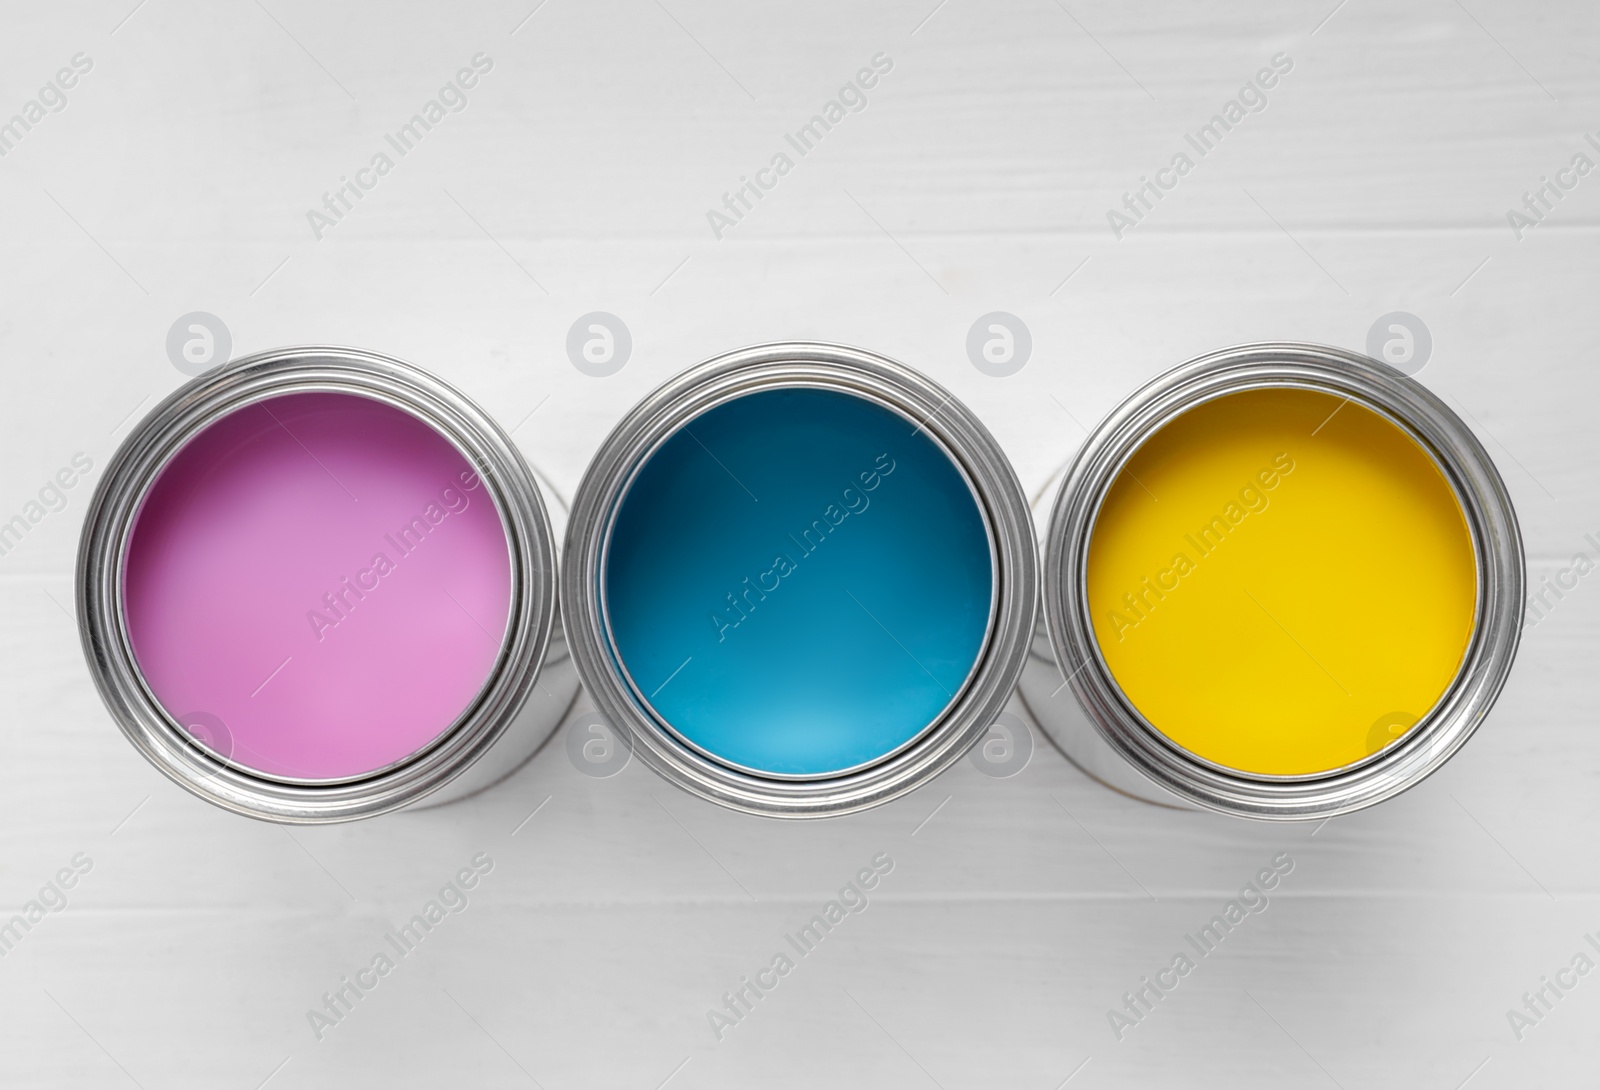 Photo of Cans of pink, light blue and yellow paints on white wooden table, flat lay